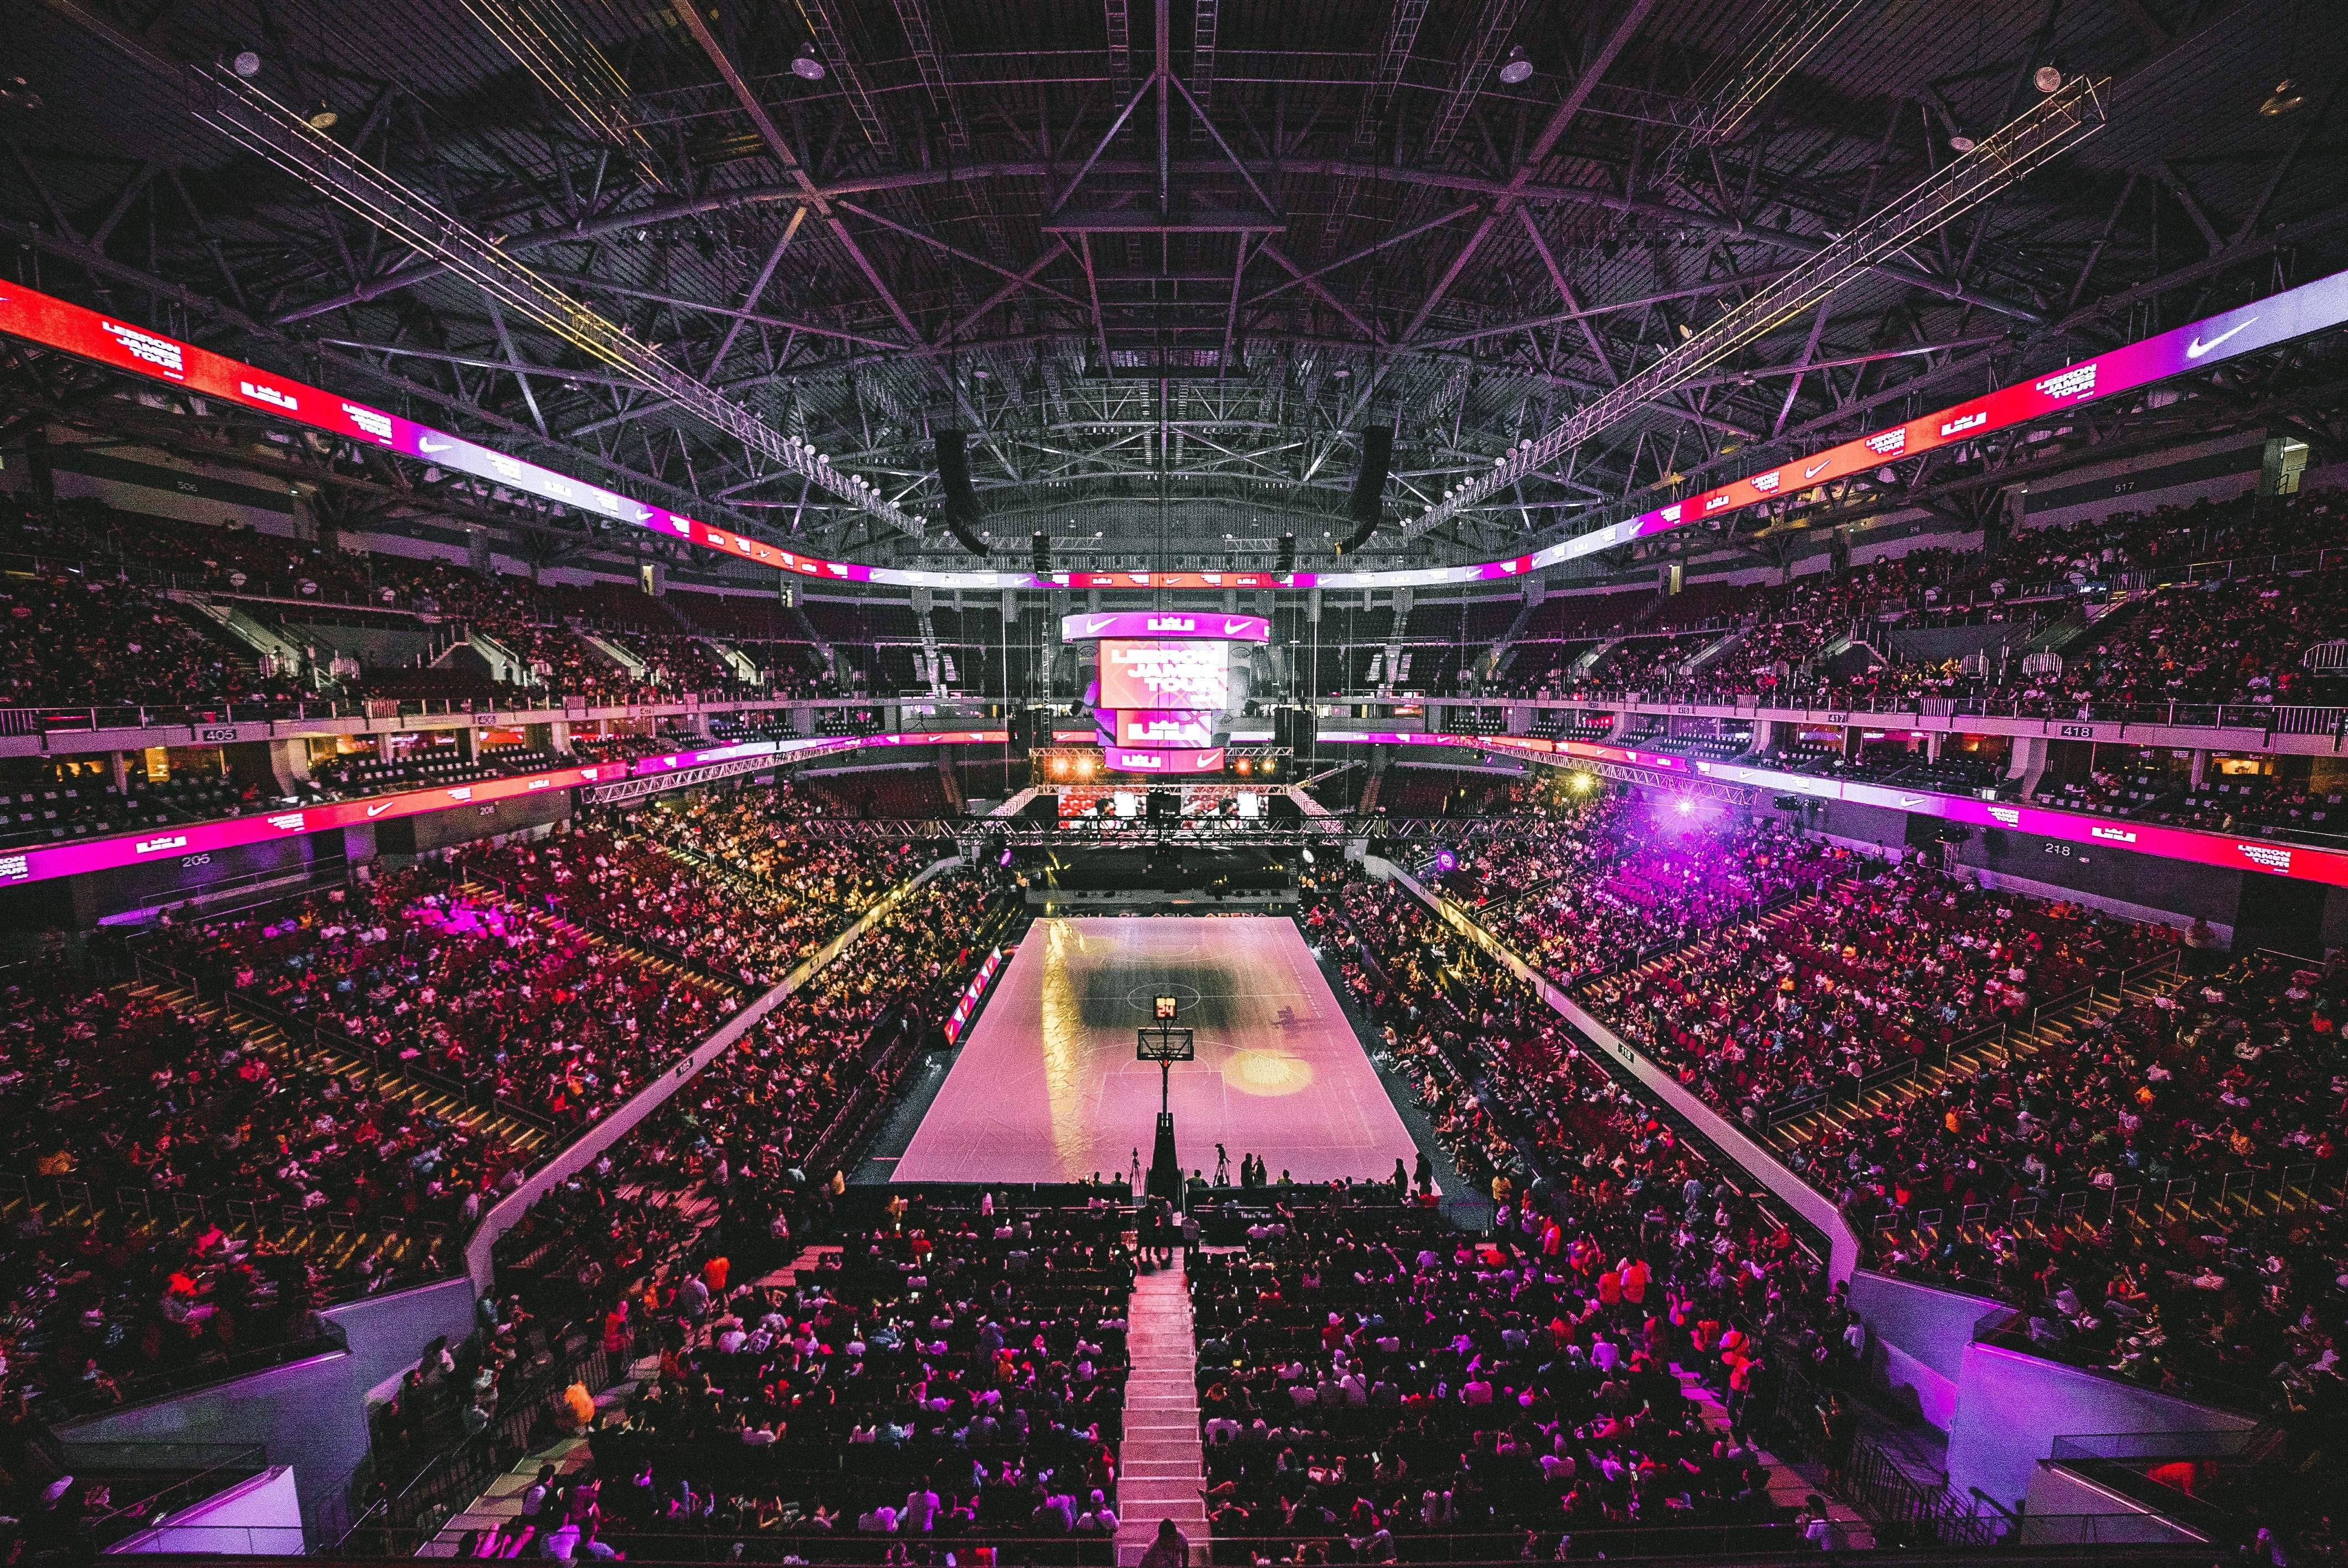 Crowded basketball stadium with neon lights.